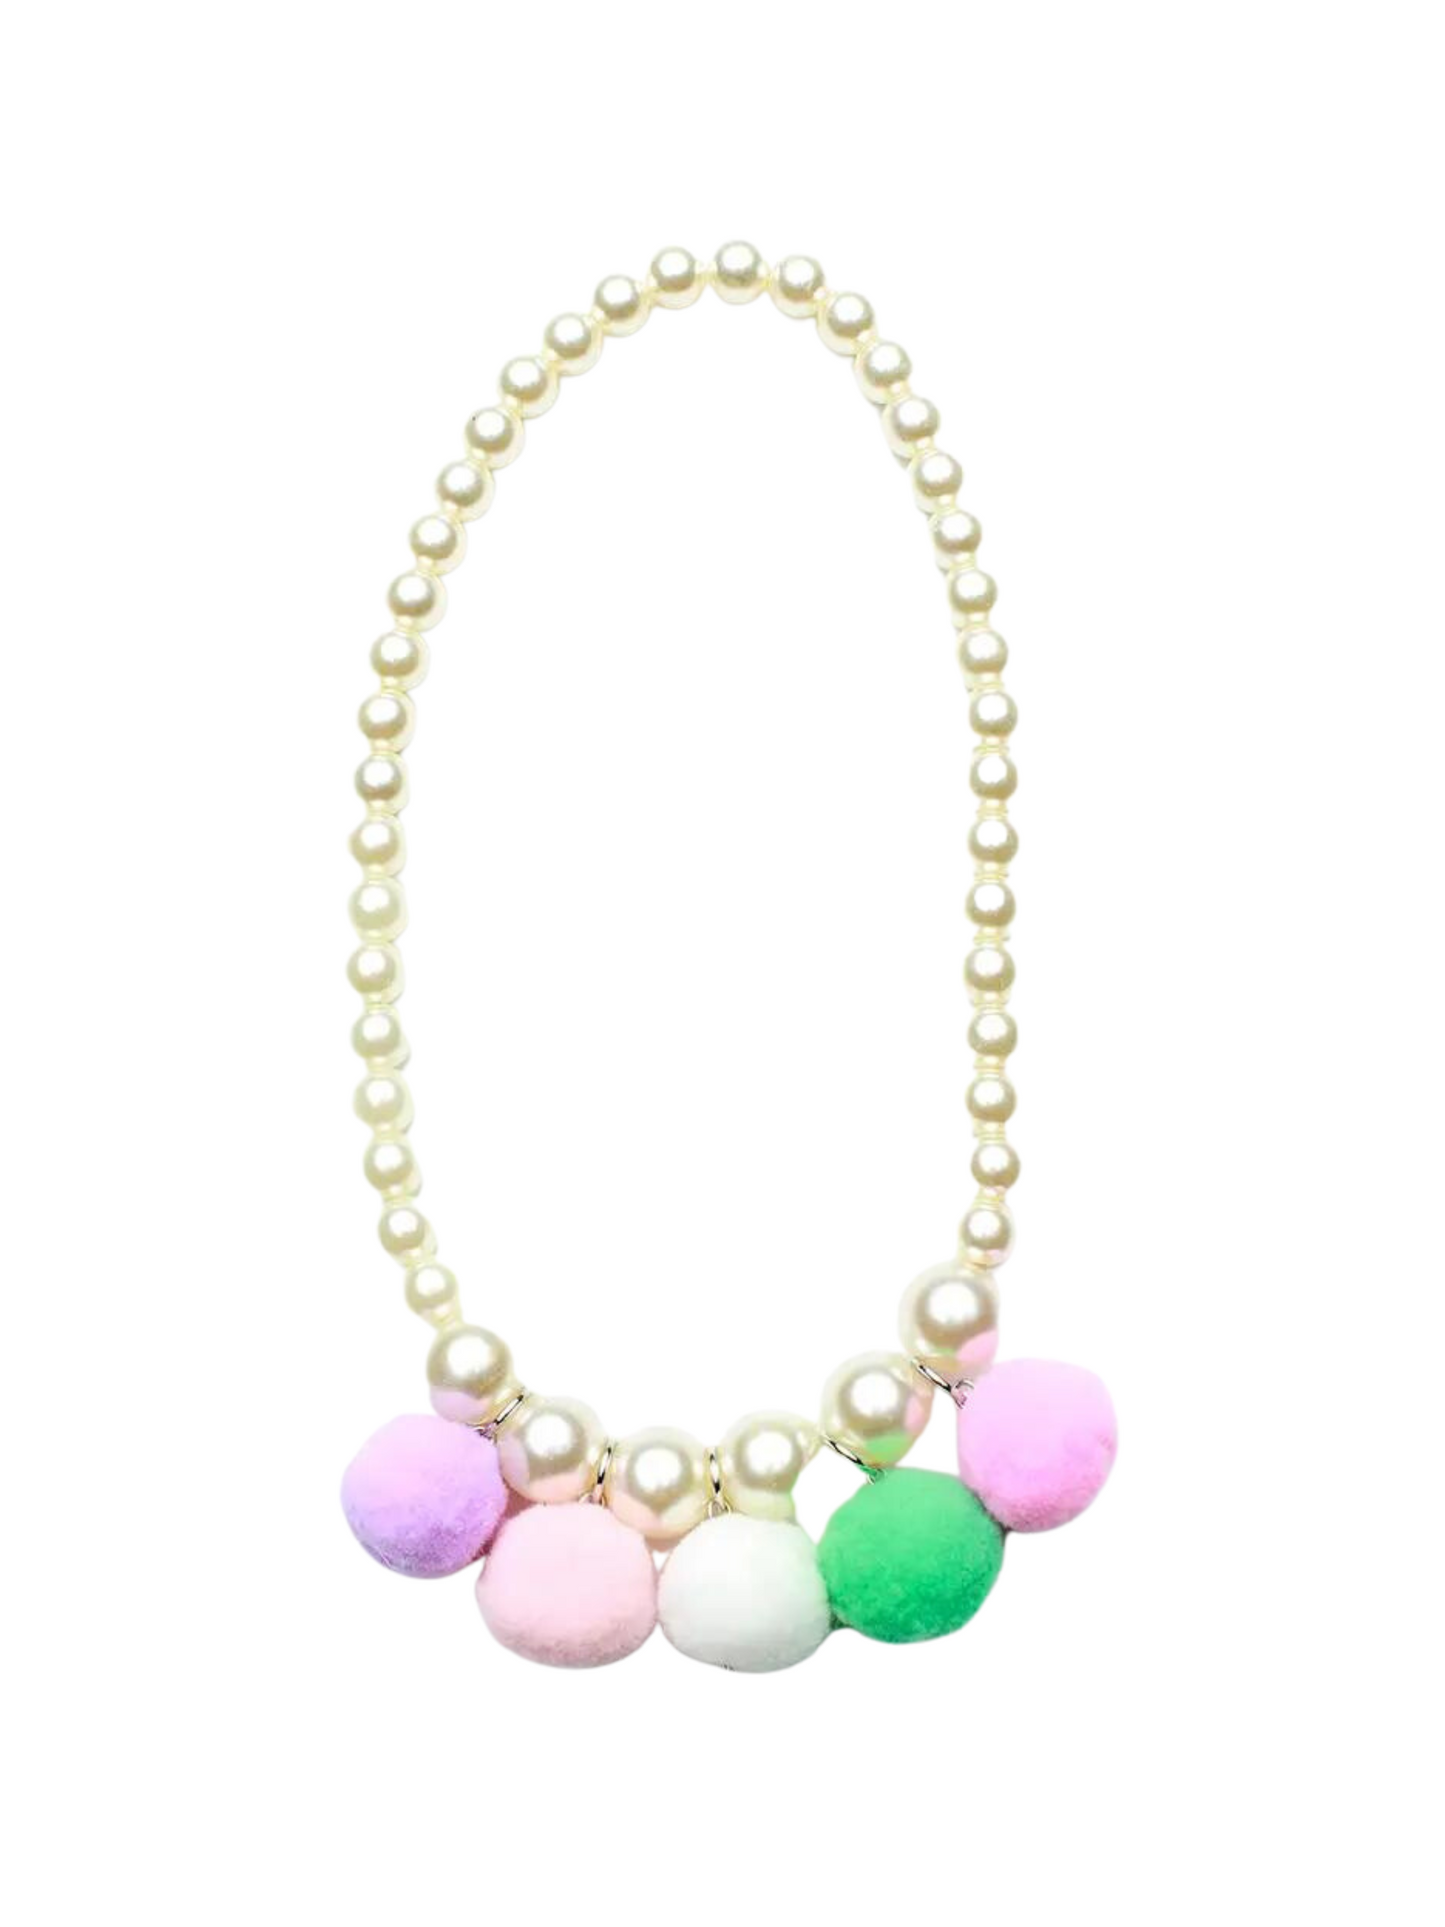 GIRLS PASTEL POM POM PEARL NECKLACE - THE LITTLE EAGLE BOUTIQUE